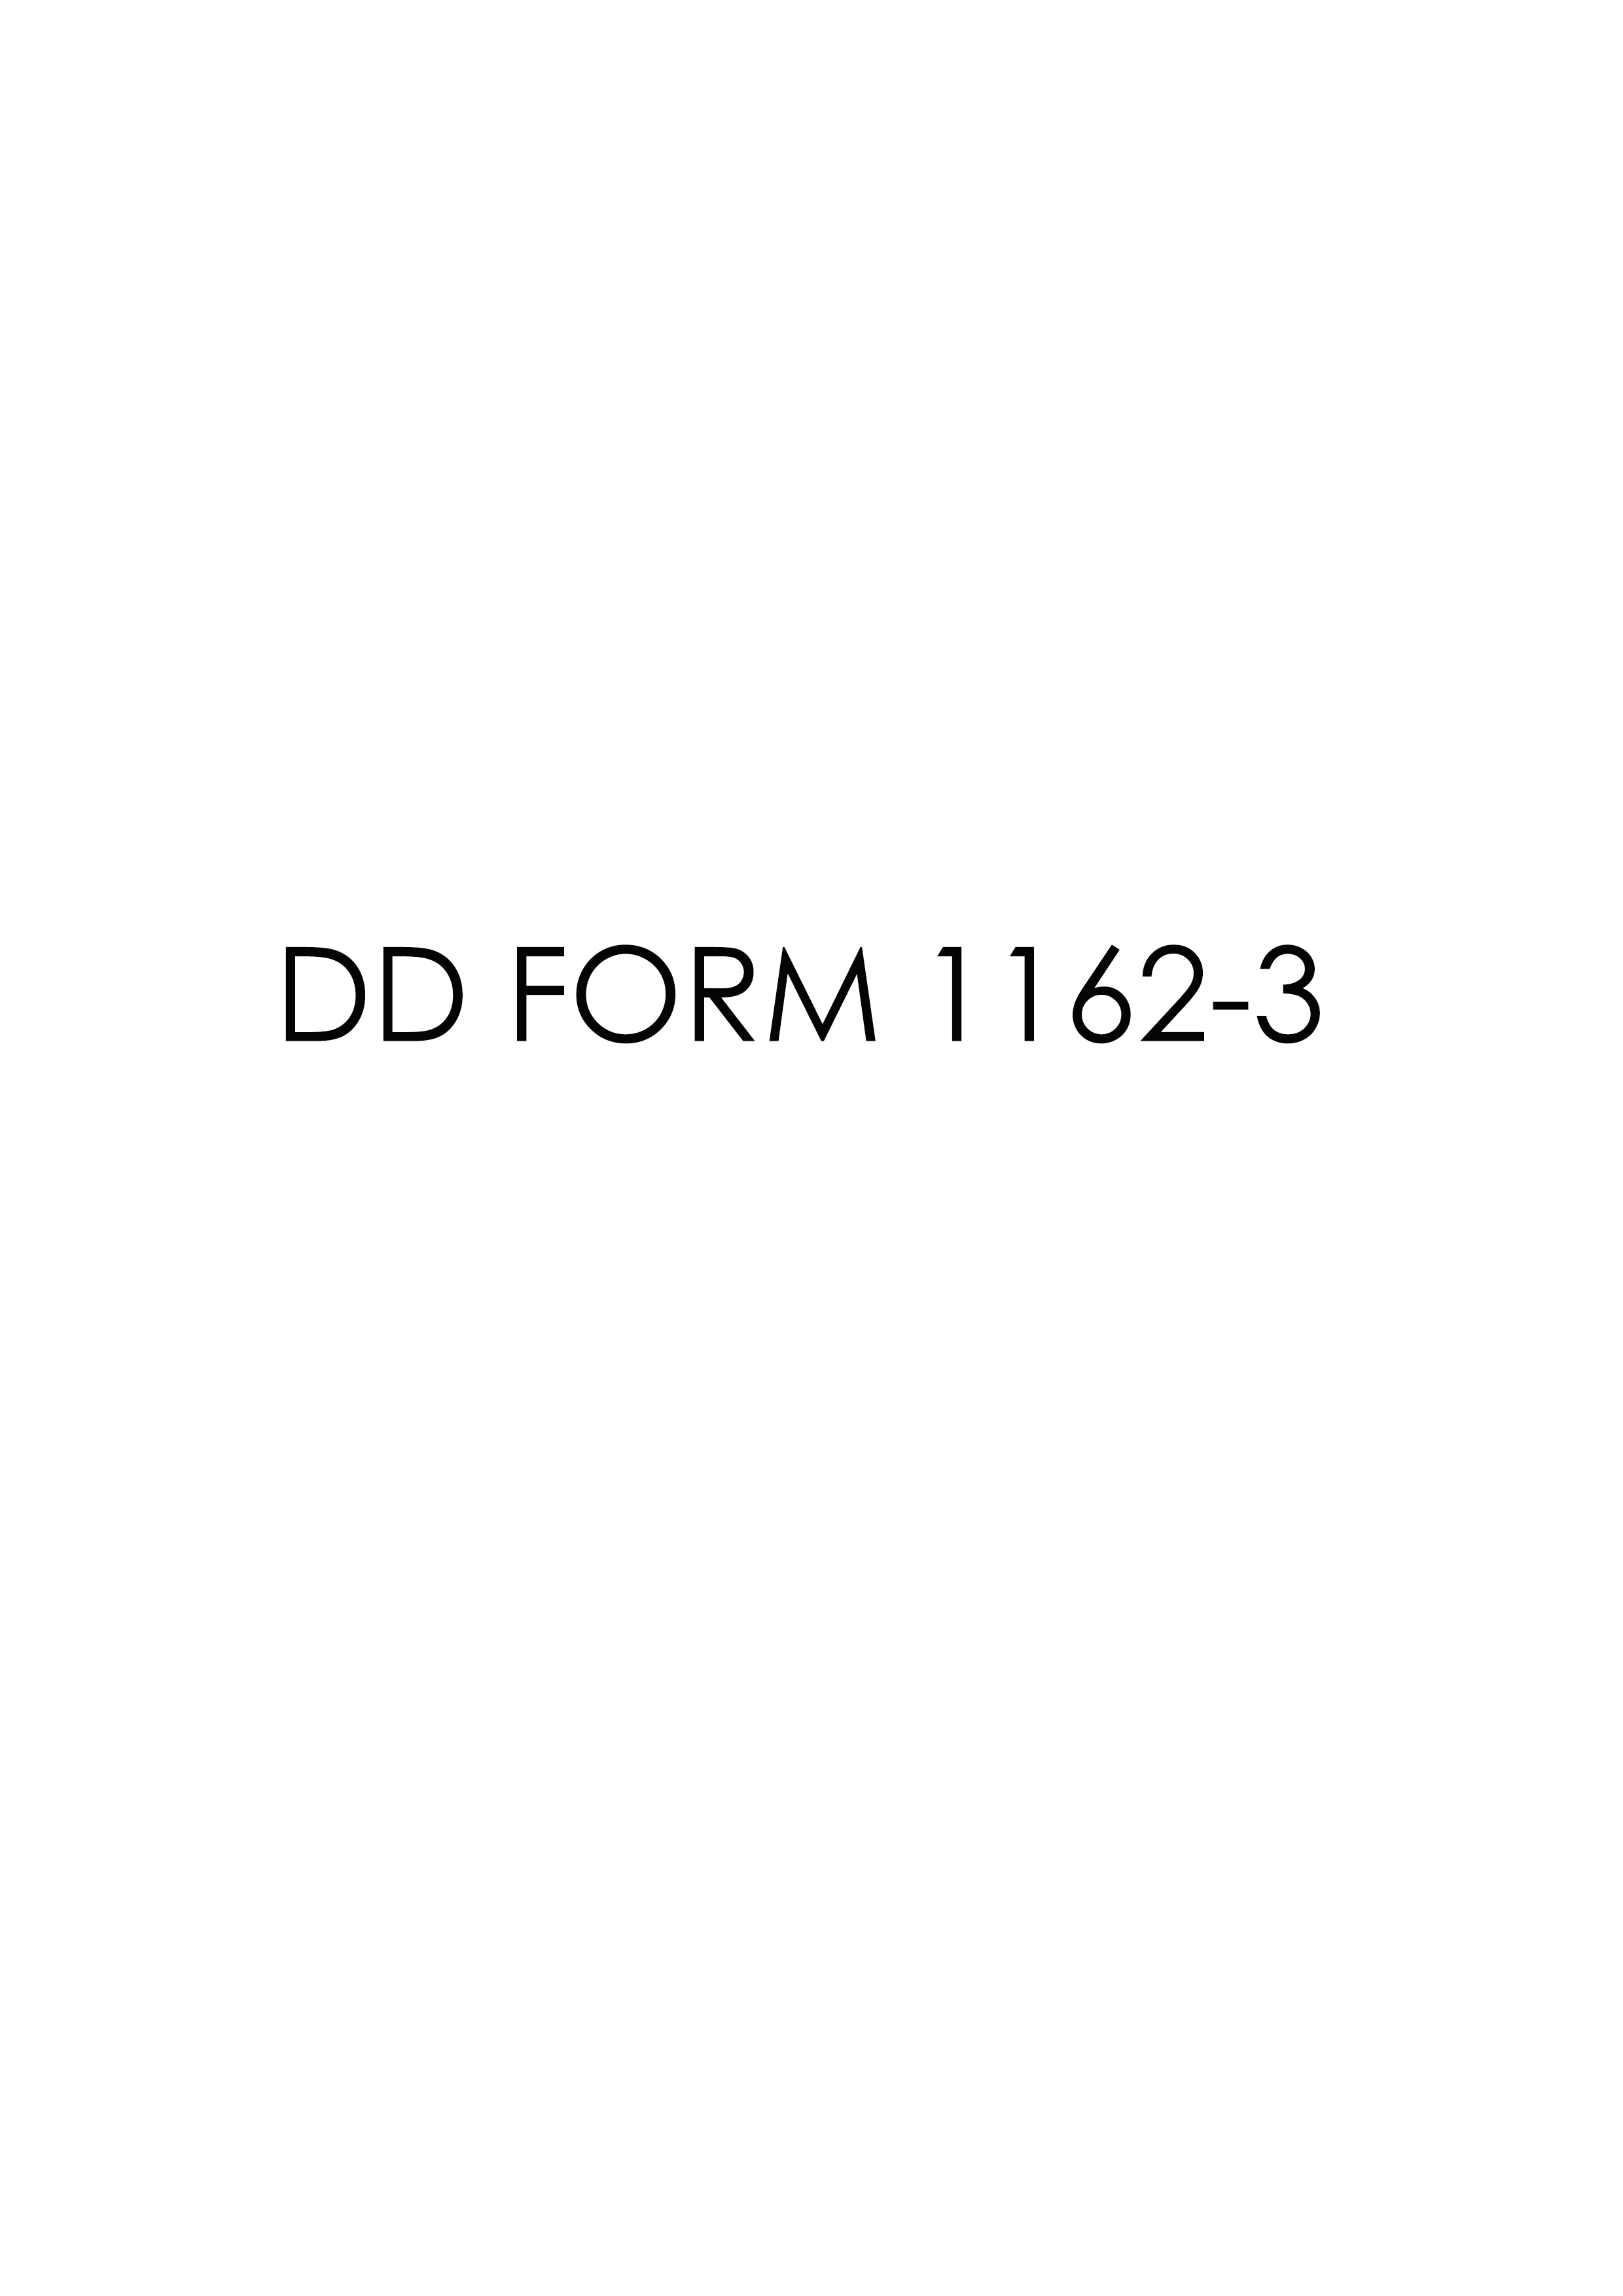 Download Fillable dd Form 1162-3